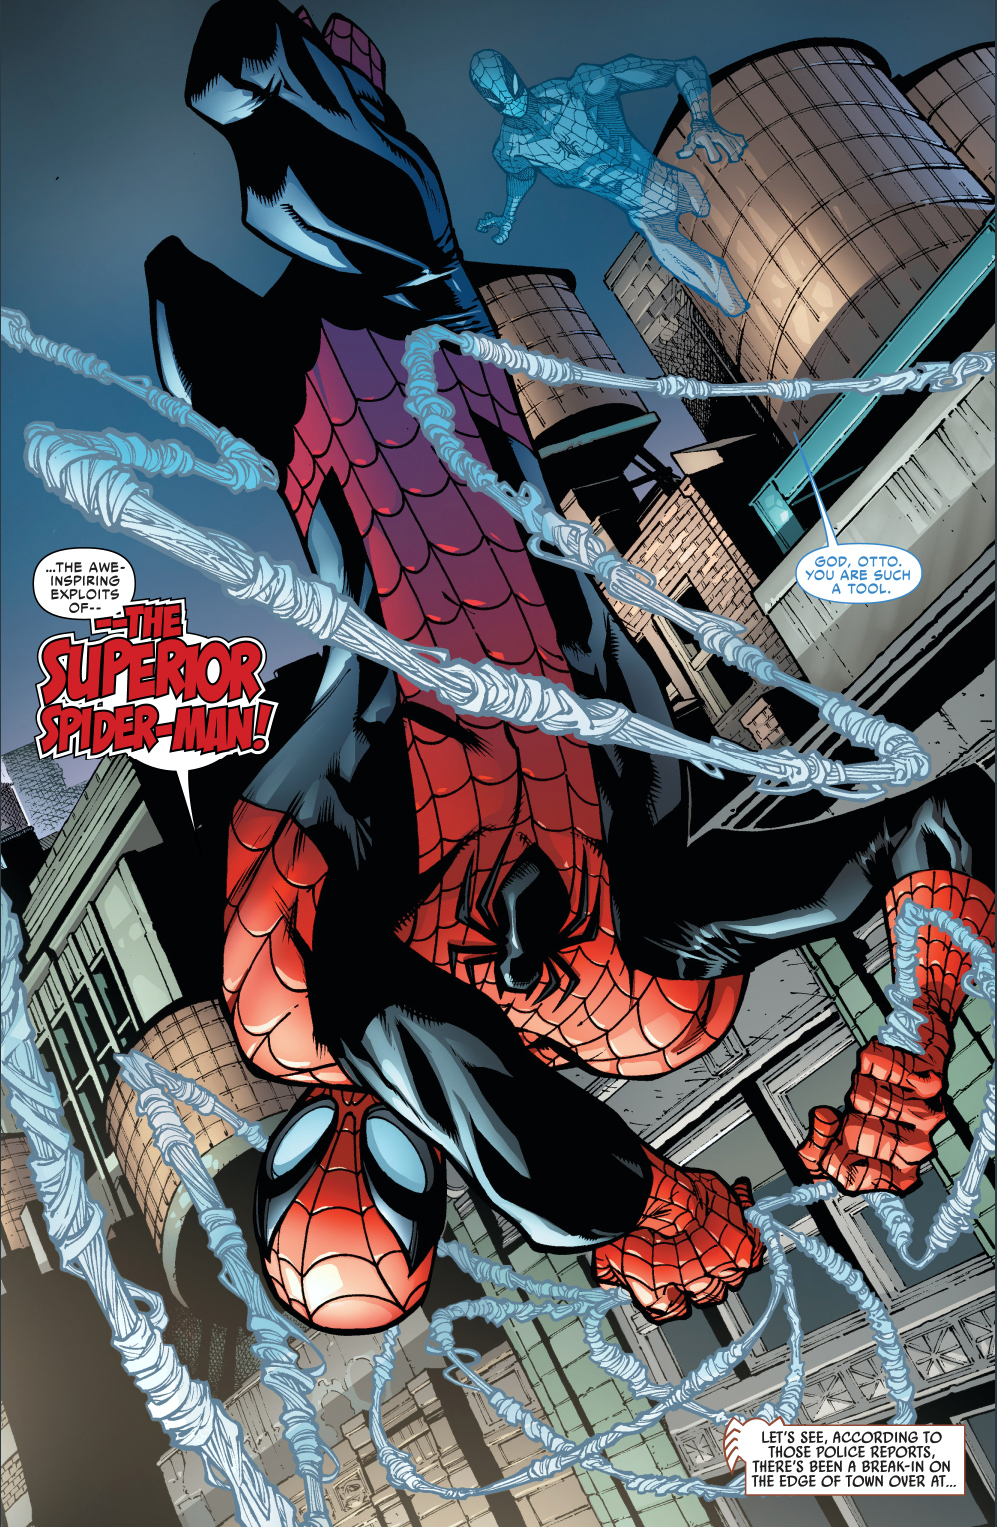 superior spider-man is a tool